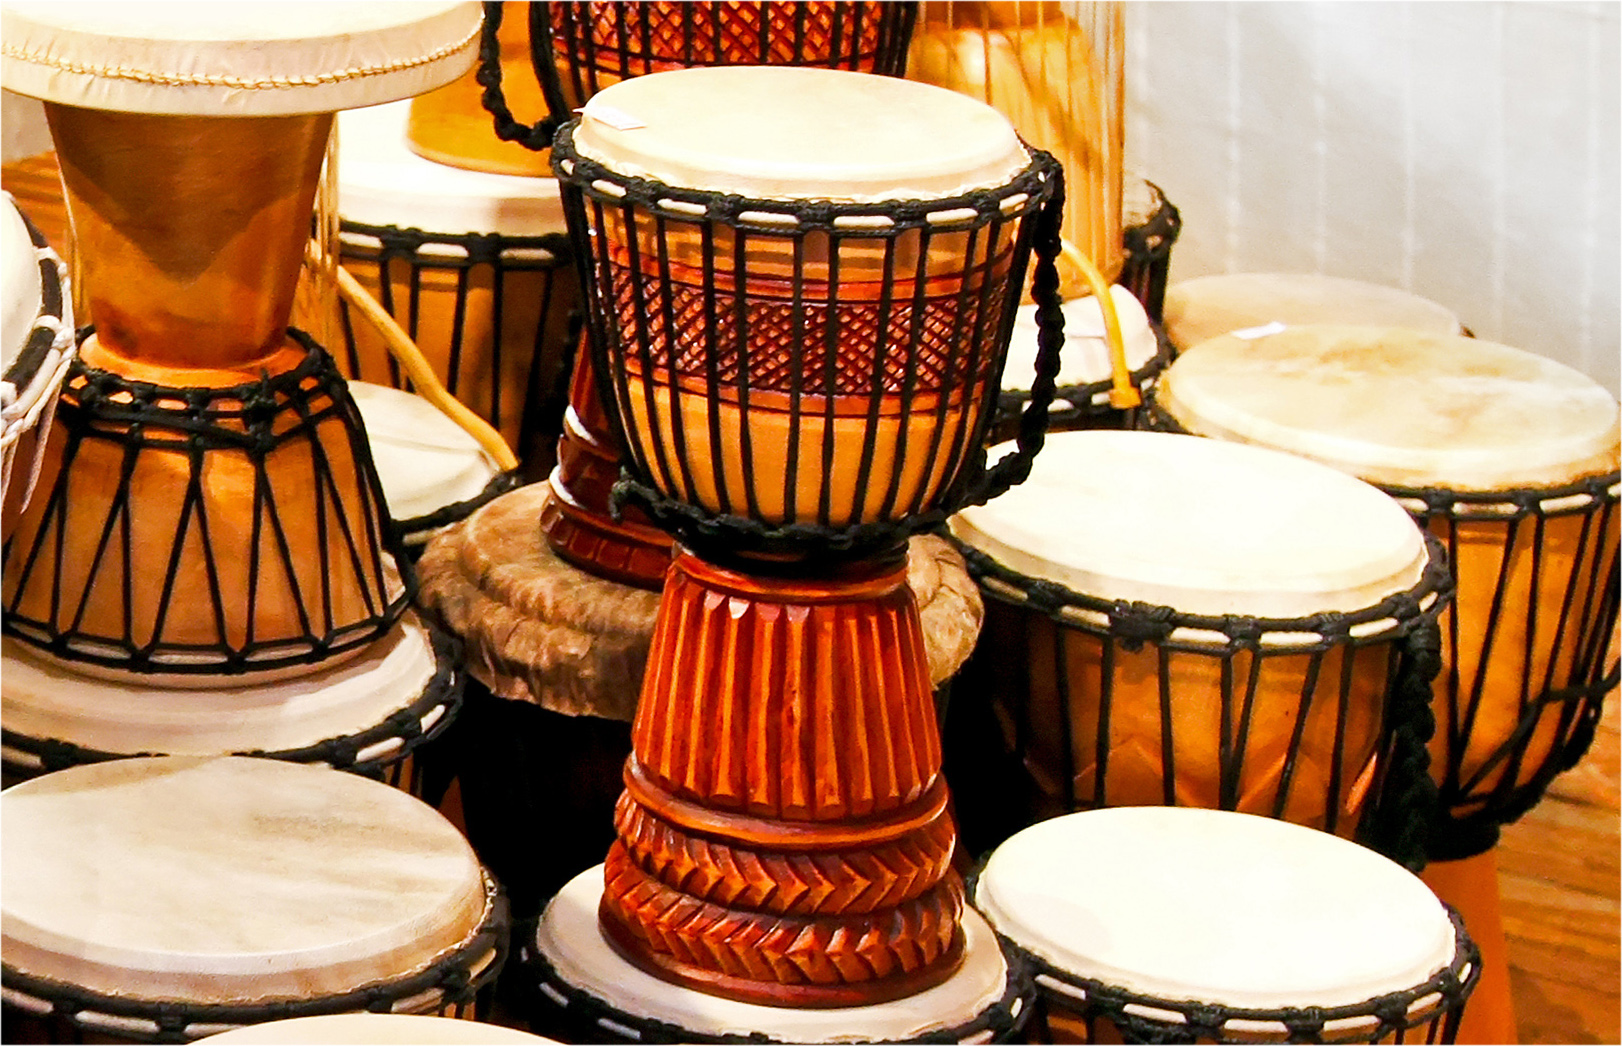 a collection of traditional and hand-crafted drums